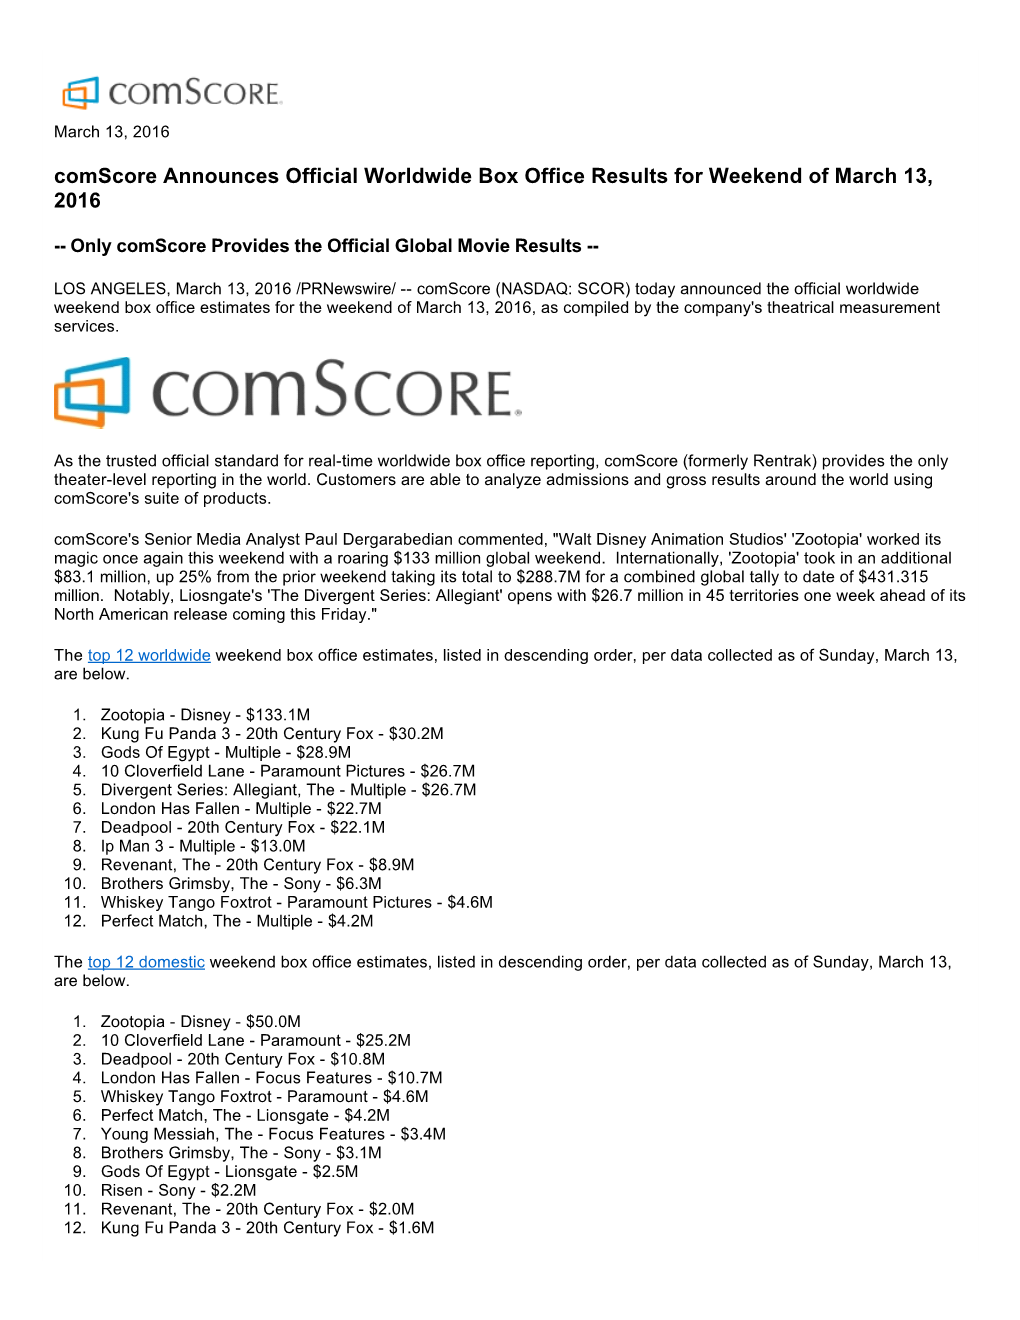 Comscore Announces Official Worldwide Box Office Results for Weekend of March 13, 2016